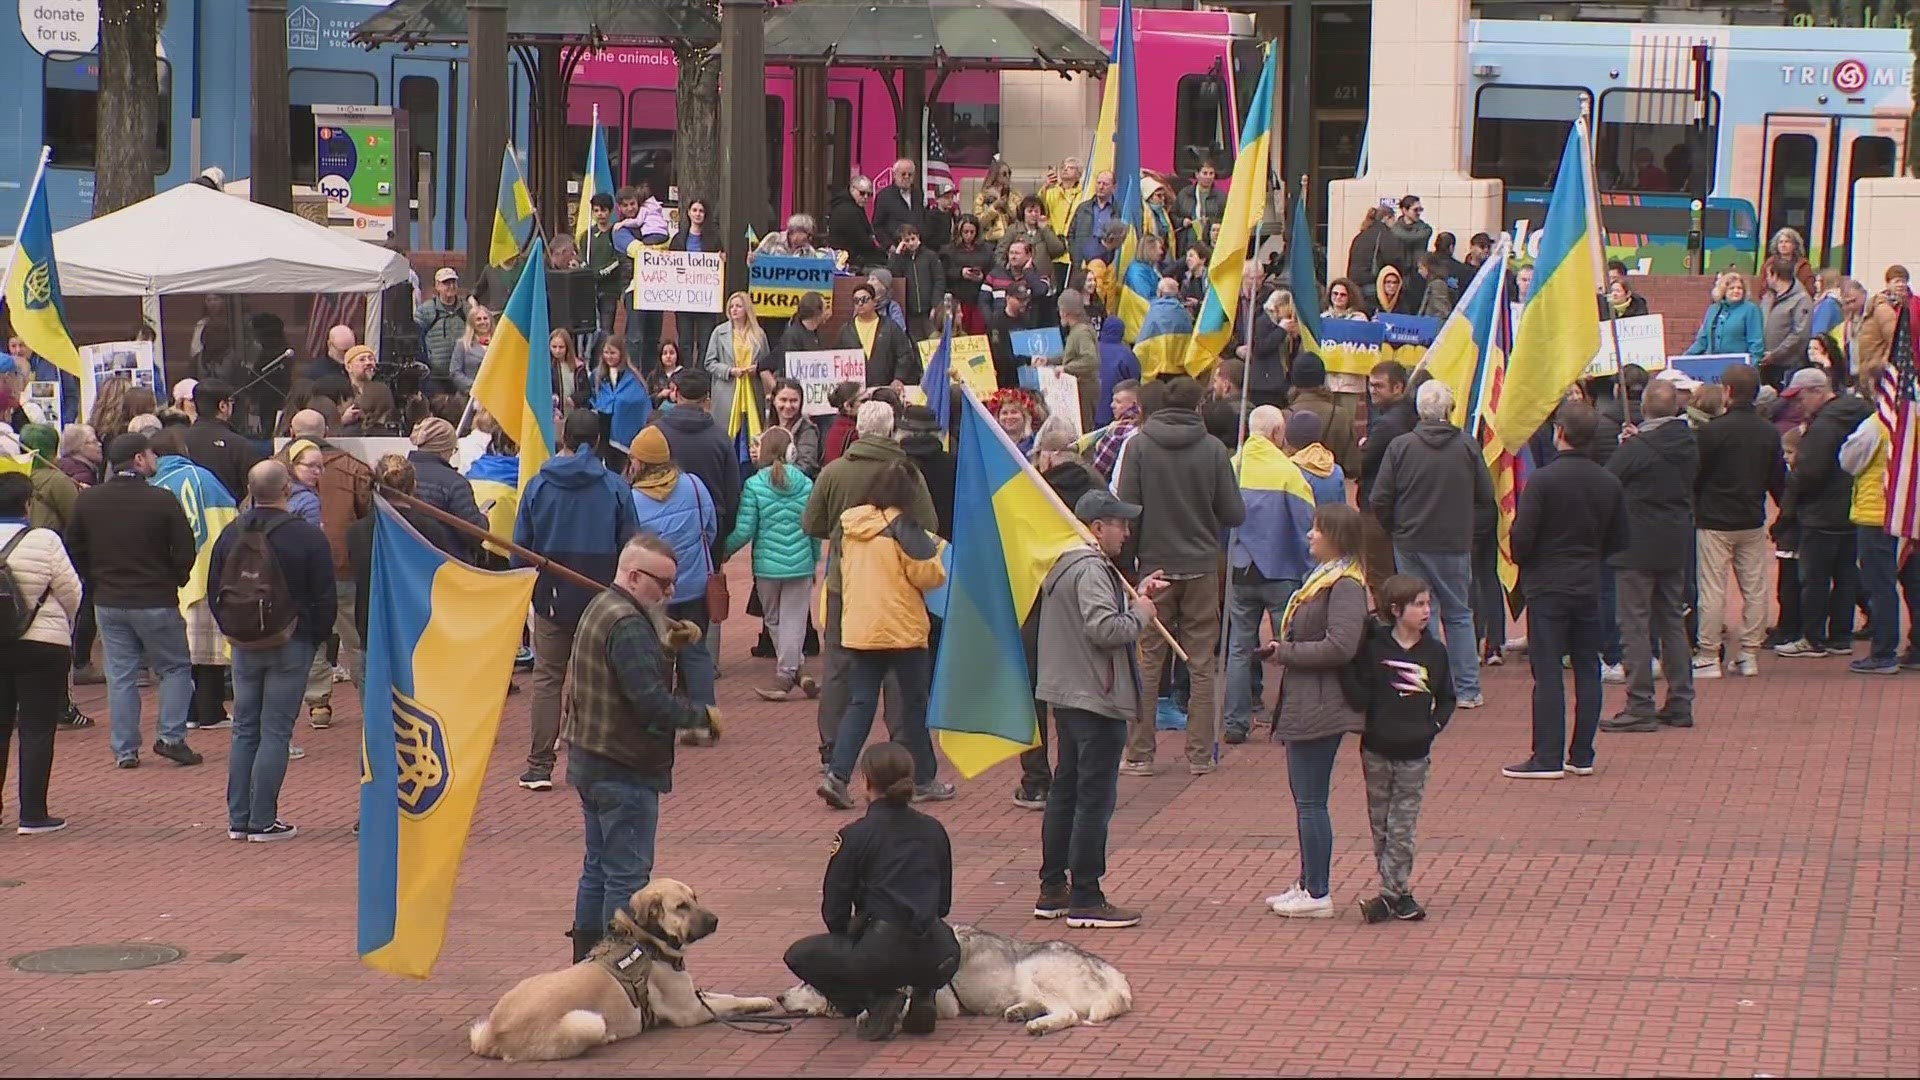 The crowd gathered at Pioneer Courthouse Square to spark awareness for the Ukrainians' plight and the need for more aid.